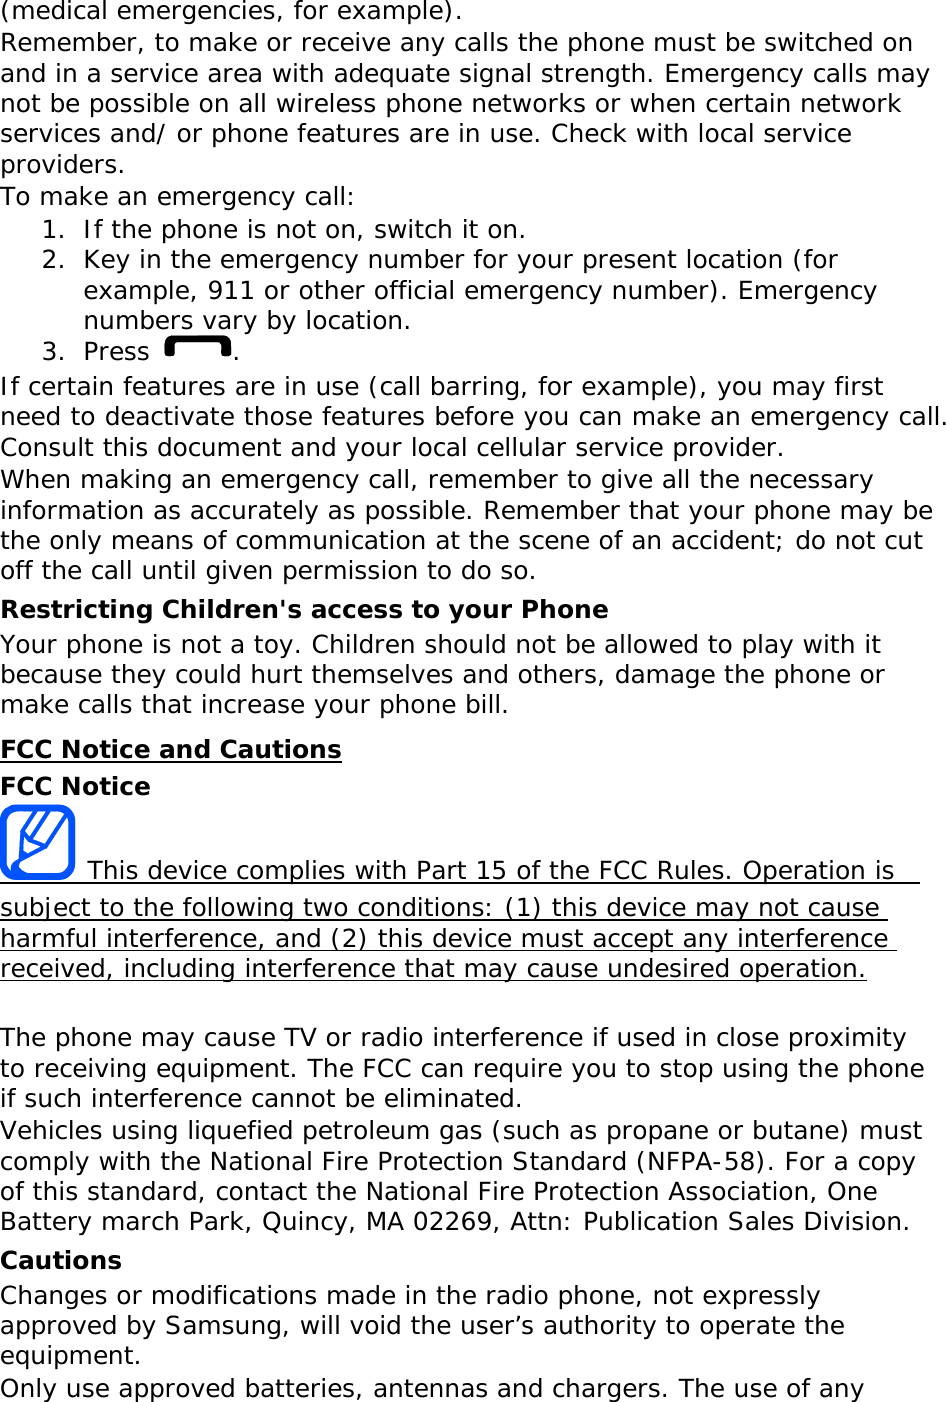 (medical emergencies, for example). Remember, to make or receive any calls the phone must be switched on and in a service area with adequate signal strength. Emergency calls may not be possible on all wireless phone networks or when certain network services and/ or phone features are in use. Check with local service providers. To make an emergency call: 1. If the phone is not on, switch it on. 2. Key in the emergency number for your present location (for example, 911 or other official emergency number). Emergency numbers vary by location. 3. Press  . If certain features are in use (call barring, for example), you may first need to deactivate those features before you can make an emergency call. Consult this document and your local cellular service provider. When making an emergency call, remember to give all the necessary information as accurately as possible. Remember that your phone may be the only means of communication at the scene of an accident; do not cut off the call until given permission to do so. Restricting Children&apos;s access to your Phone Your phone is not a toy. Children should not be allowed to play with it because they could hurt themselves and others, damage the phone or make calls that increase your phone bill. FCC Notice and Cautions FCC Notice  This device complies with Part 15 of the FCC Rules. Operation is  subject to the following two conditions: (1) this device may not cause harmful interference, and (2) this device must accept any interference received, including interference that may cause undesired operation.  The phone may cause TV or radio interference if used in close proximity to receiving equipment. The FCC can require you to stop using the phone if such interference cannot be eliminated. Vehicles using liquefied petroleum gas (such as propane or butane) must comply with the National Fire Protection Standard (NFPA-58). For a copy of this standard, contact the National Fire Protection Association, One Battery march Park, Quincy, MA 02269, Attn: Publication Sales Division. Cautions Changes or modifications made in the radio phone, not expressly approved by Samsung, will void the user’s authority to operate the equipment. Only use approved batteries, antennas and chargers. The use of any 